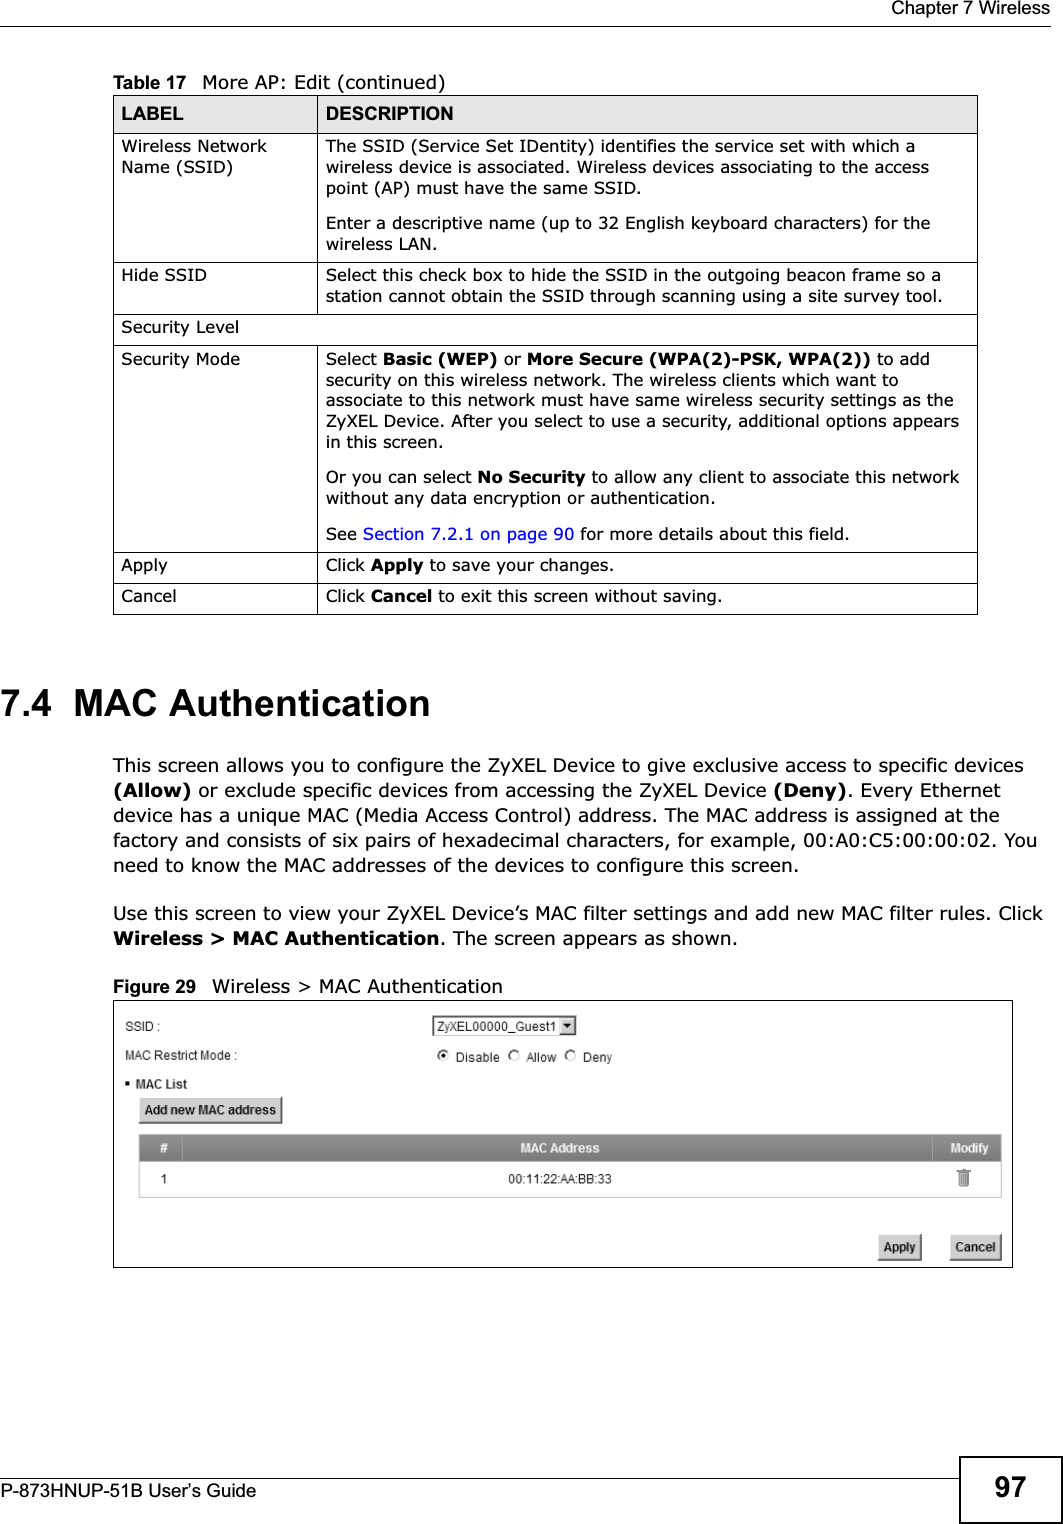  Chapter 7 WirelessP-873HNUP-51B User’s Guide 977.4  MAC AuthenticationThis screen allows you to configure the ZyXEL Device to give exclusive access to specific devices (Allow) or exclude specific devices from accessing the ZyXEL Device (Deny). Every Ethernet device has a unique MAC (Media Access Control) address. The MAC address is assigned at the factory and consists of six pairs of hexadecimal characters, for example, 00:A0:C5:00:00:02. You need to know the MAC addresses of the devices to configure this screen.Use this screen to view your ZyXEL Device’s MAC filter settings and add new MAC filter rules. Click Wireless &gt; MAC Authentication. The screen appears as shown.Figure 29   Wireless &gt; MAC AuthenticationWireless Network Name (SSID)The SSID (Service Set IDentity) identifies the service set with which a wireless device is associated. Wireless devices associating to the access point (AP) must have the same SSID. Enter a descriptive name (up to 32 English keyboard characters) for the wireless LAN. Hide SSID Select this check box to hide the SSID in the outgoing beacon frame so a station cannot obtain the SSID through scanning using a site survey tool.Security LevelSecurity Mode Select Basic (WEP) or More Secure (WPA(2)-PSK, WPA(2)) to add security on this wireless network. The wireless clients which want to associate to this network must have same wireless security settings as the ZyXEL Device. After you select to use a security, additional options appears in this screen.  Or you can select No Security to allow any client to associate this network without any data encryption or authentication.See Section 7.2.1 on page 90 for more details about this field.Apply Click Apply to save your changes.Cancel Click Cancel to exit this screen without saving.Table 17   More AP: Edit (continued)LABEL DESCRIPTION